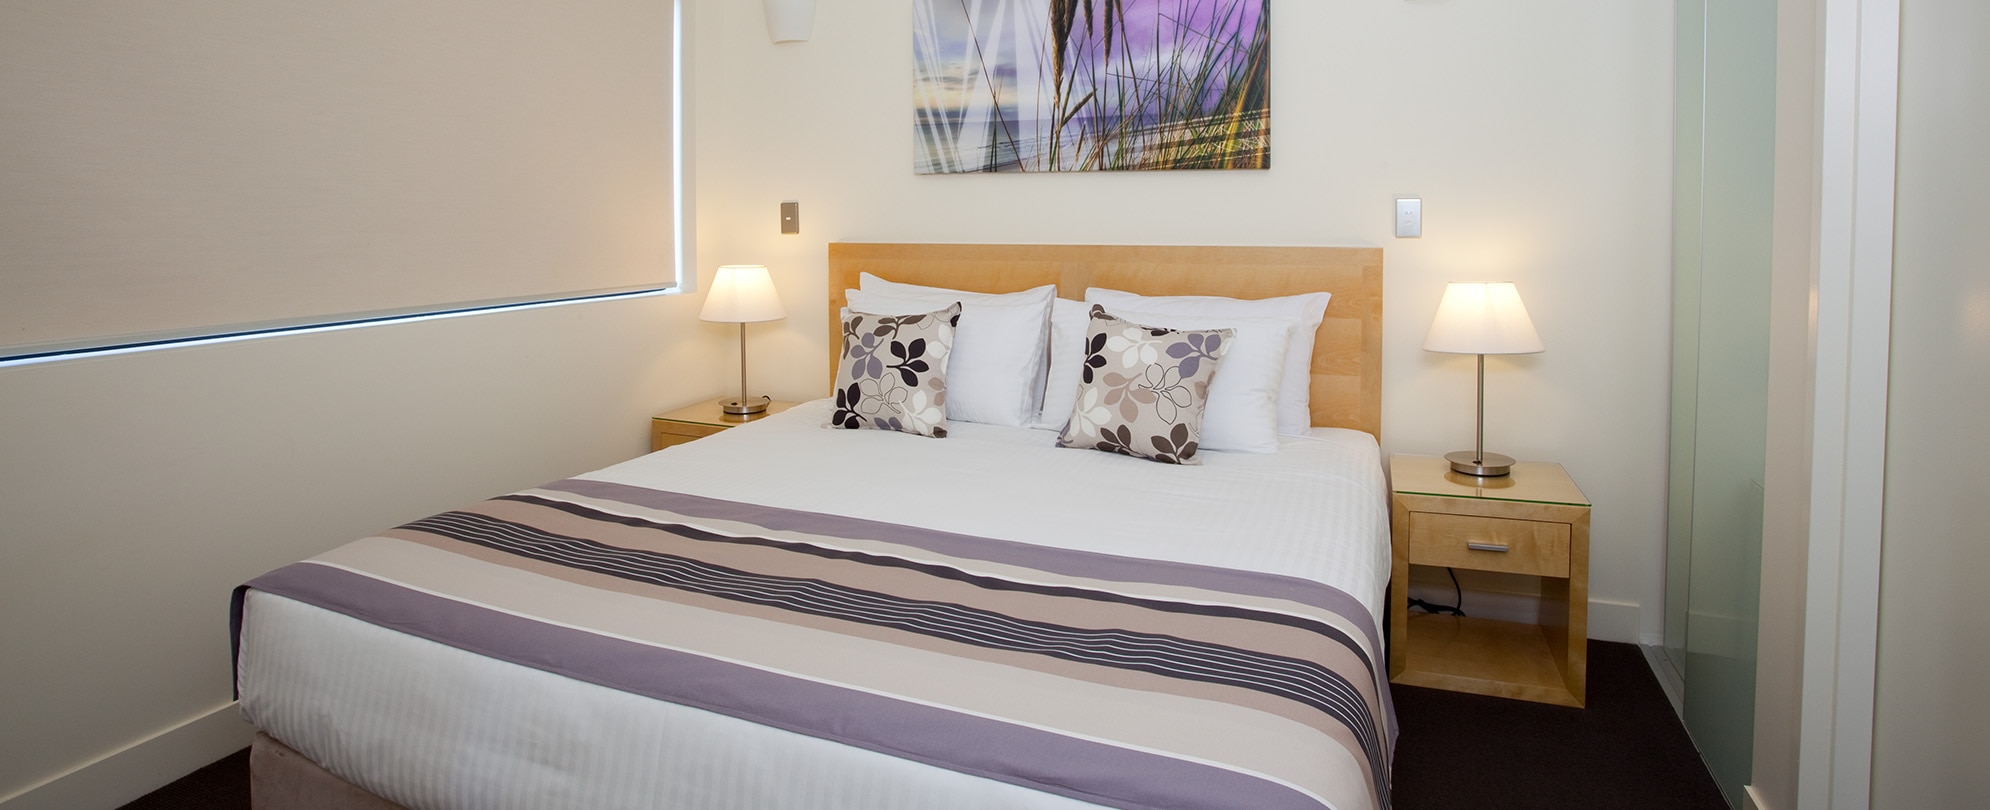 A queen-sized bed in one of the bedrooms of a 2-bedroom deluxe suite at Club Wyndham Coffs Harbor.